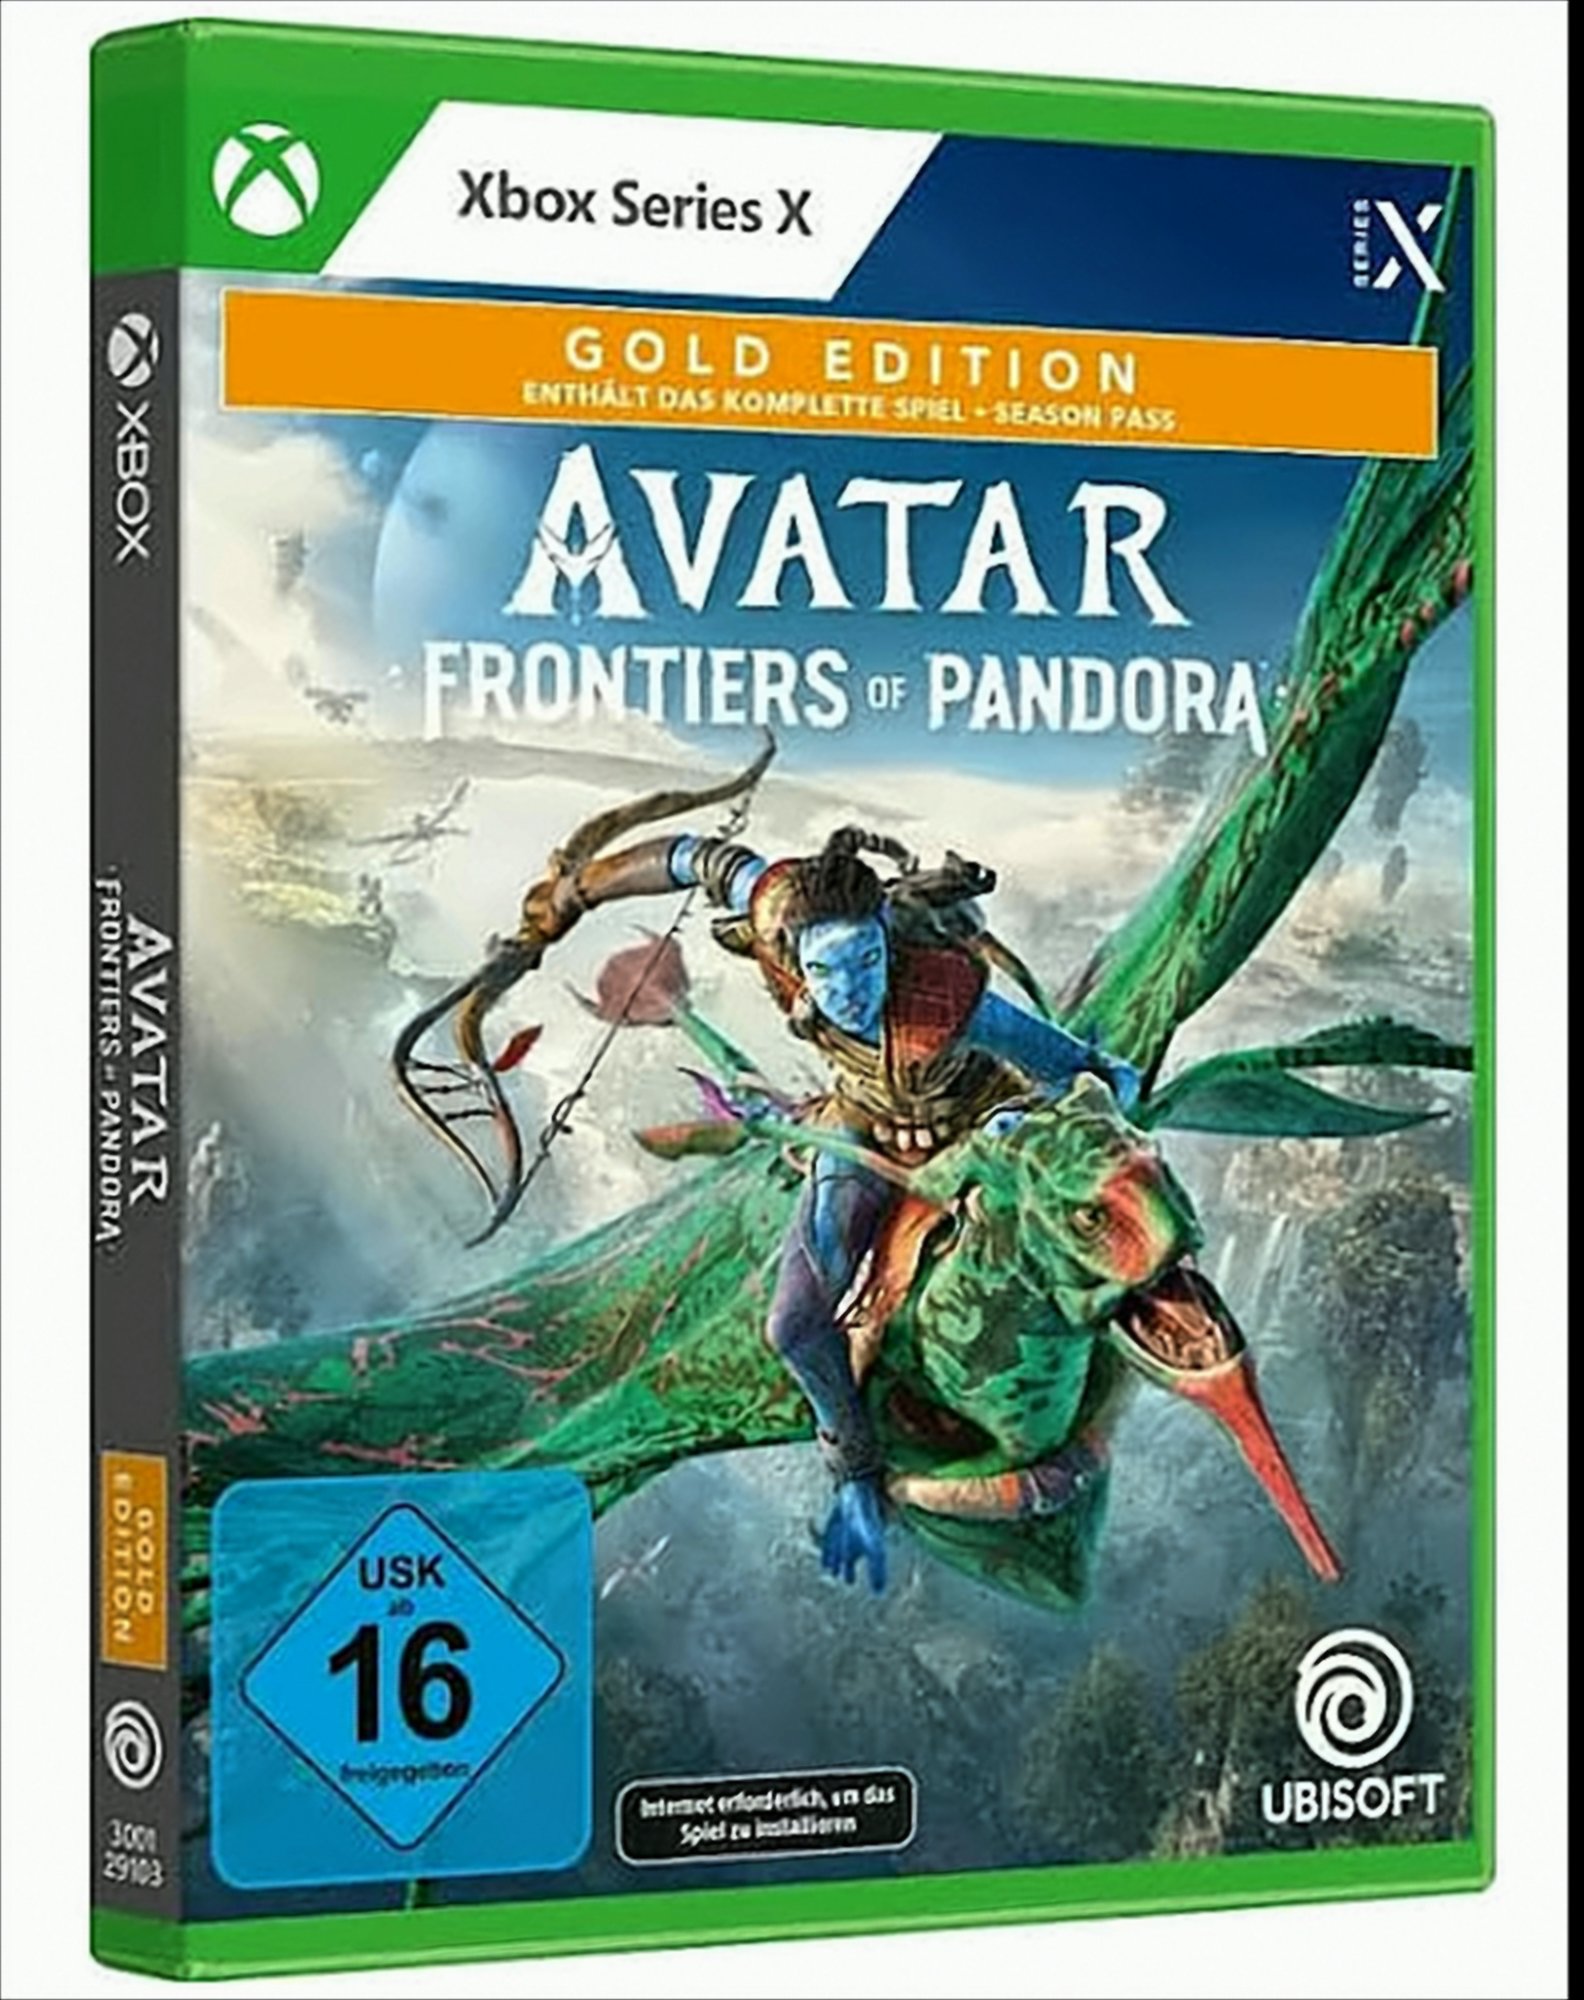 Avatar XBSX Frontiers of Pandora Gold Ed.